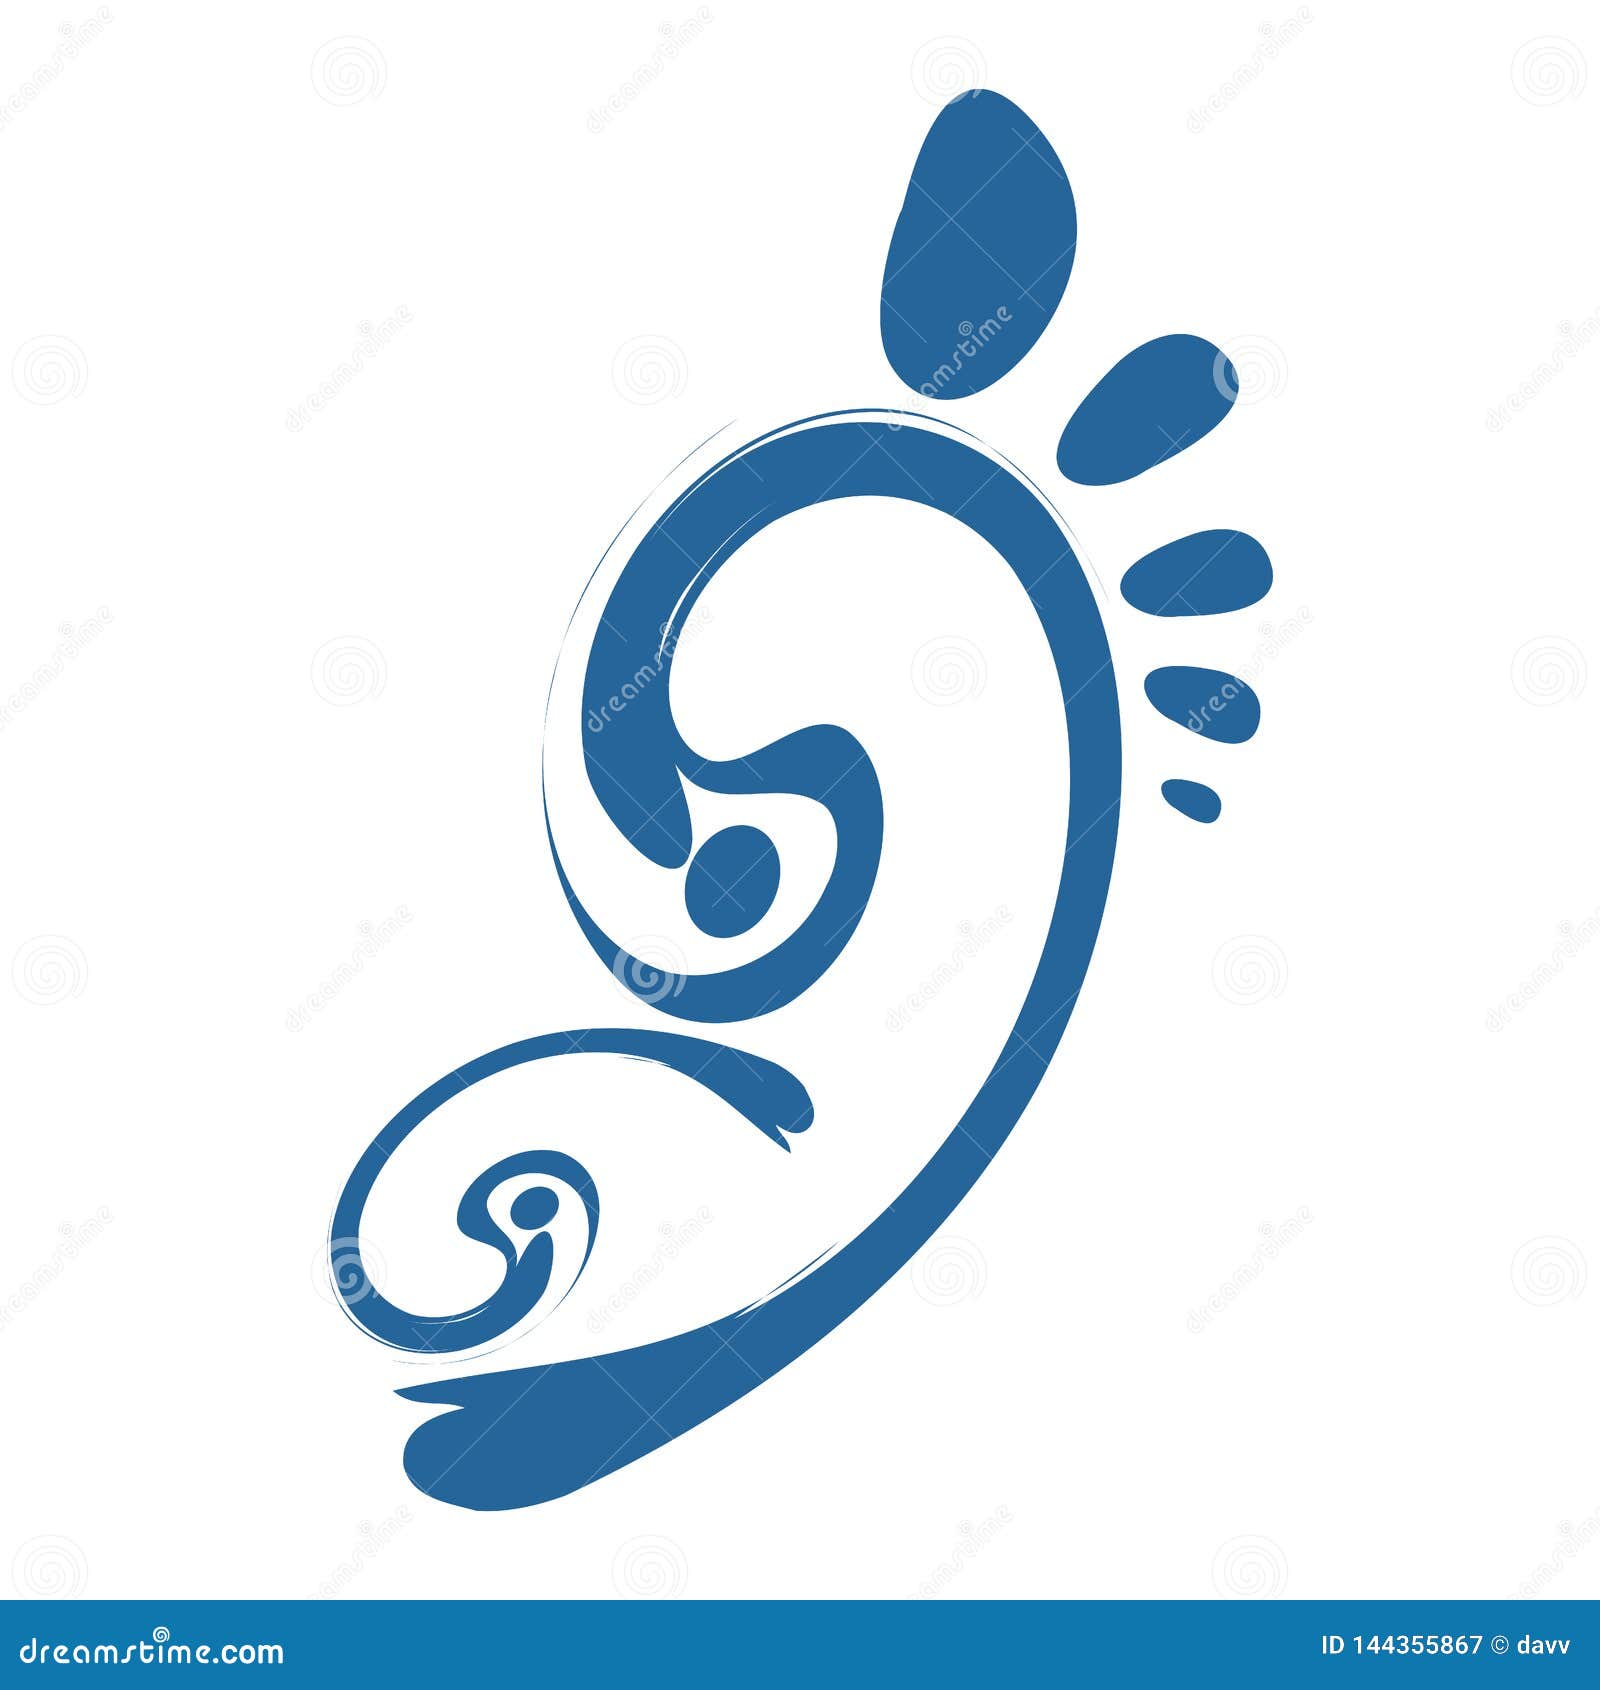 Abstract Footprints Silhouette Concept Design Symbol Graphic